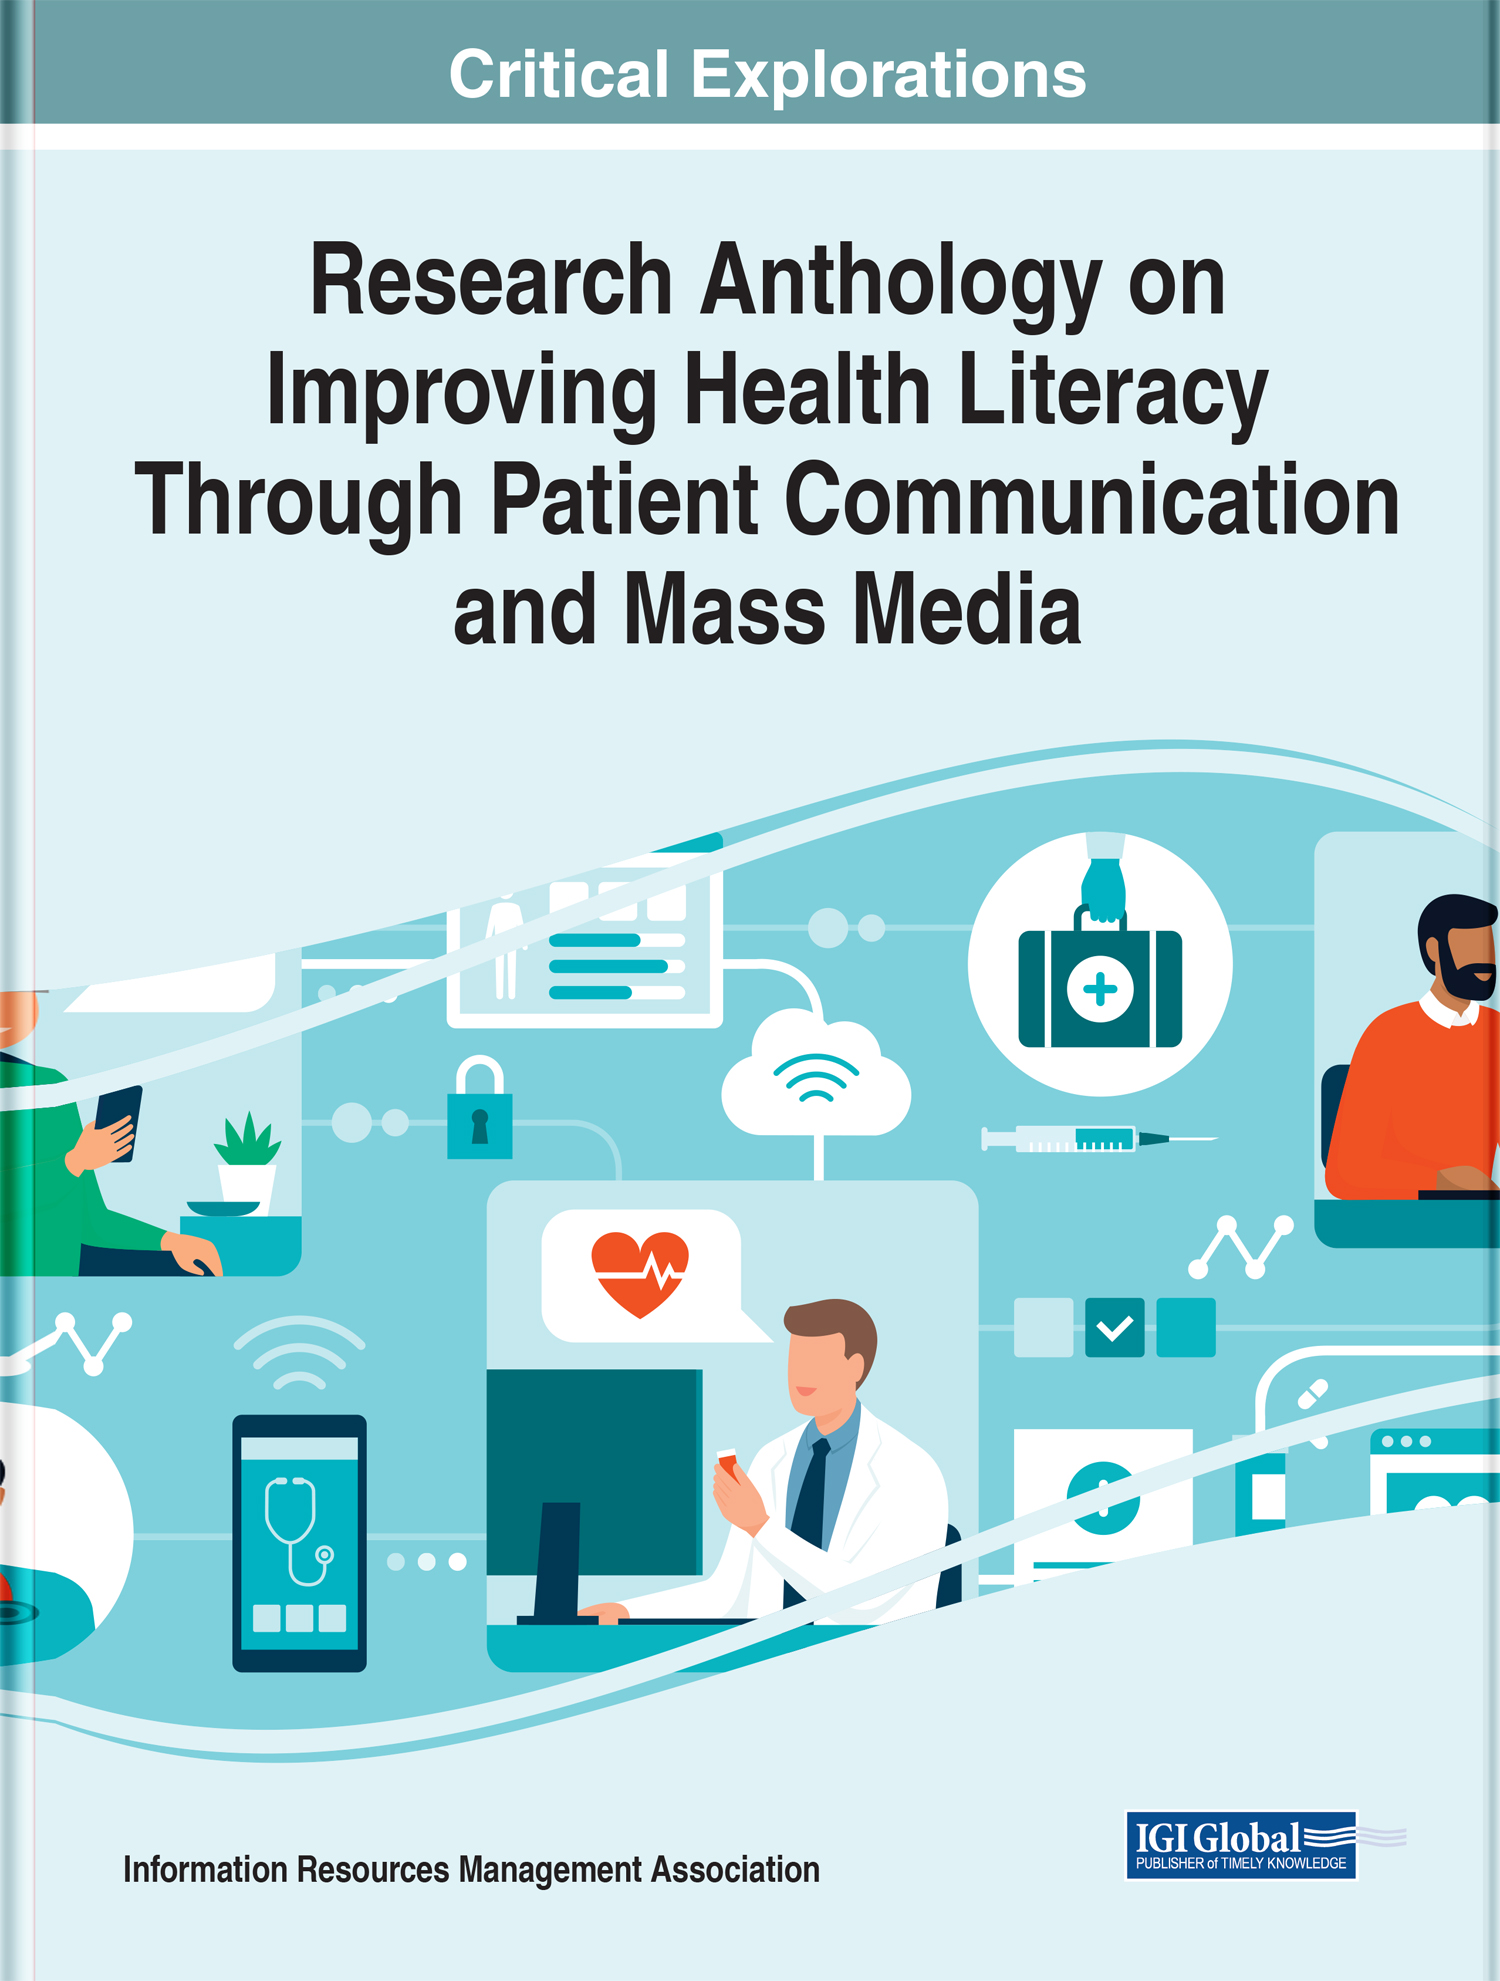 Cover image of the book, Research Anthology on Improving Health Literacy Through Patient Communication and Mass Media